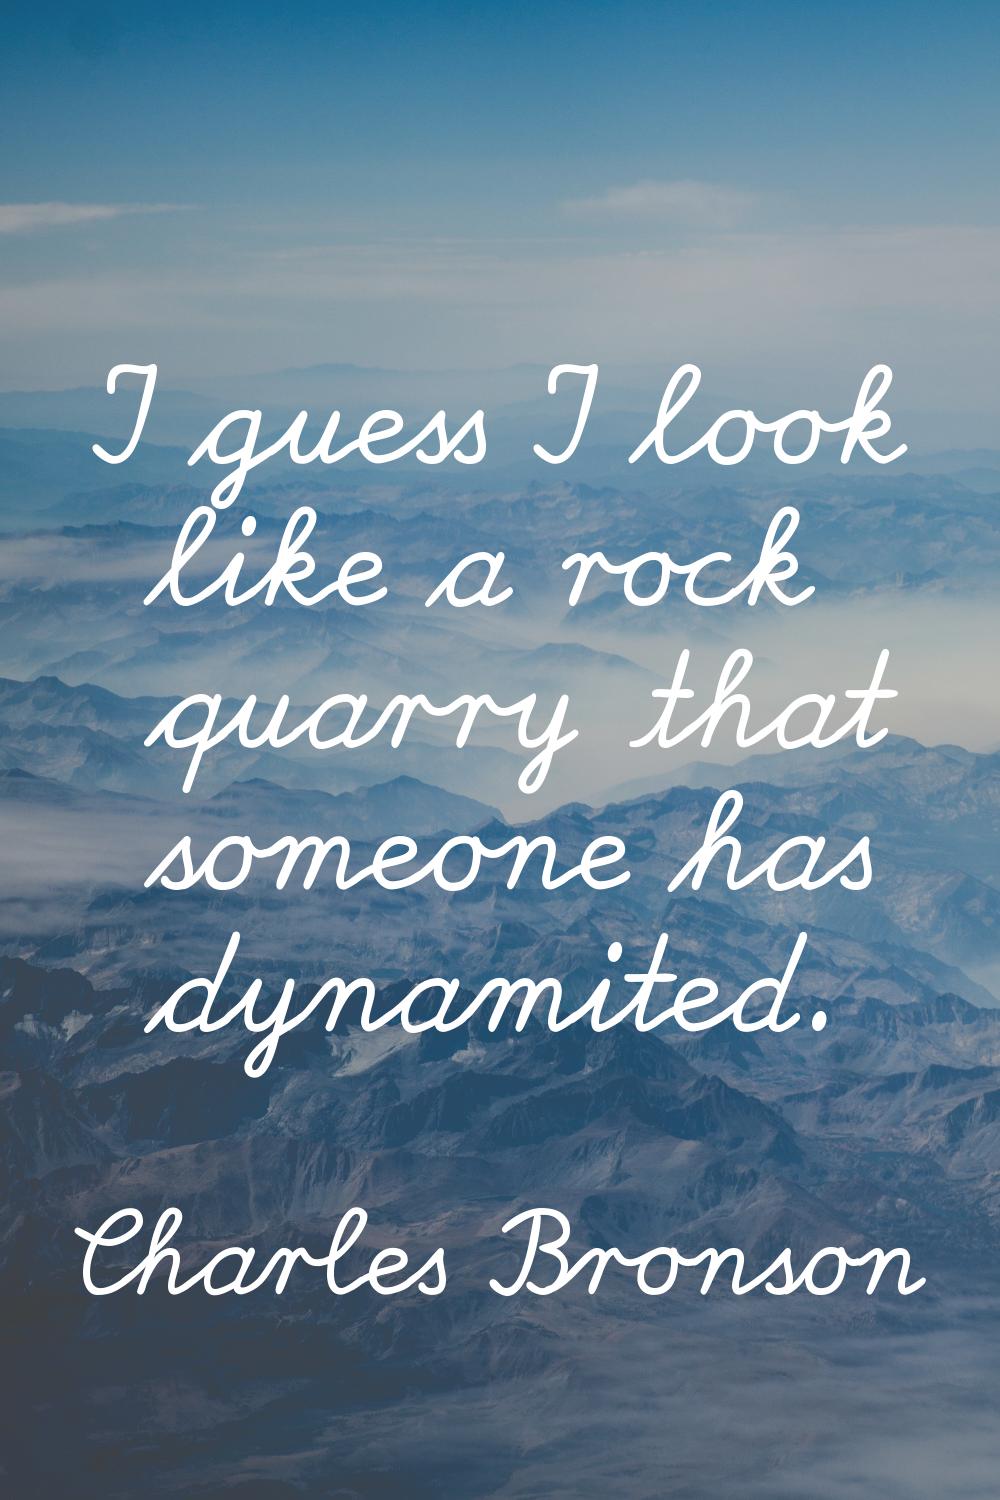 I guess I look like a rock quarry that someone has dynamited.